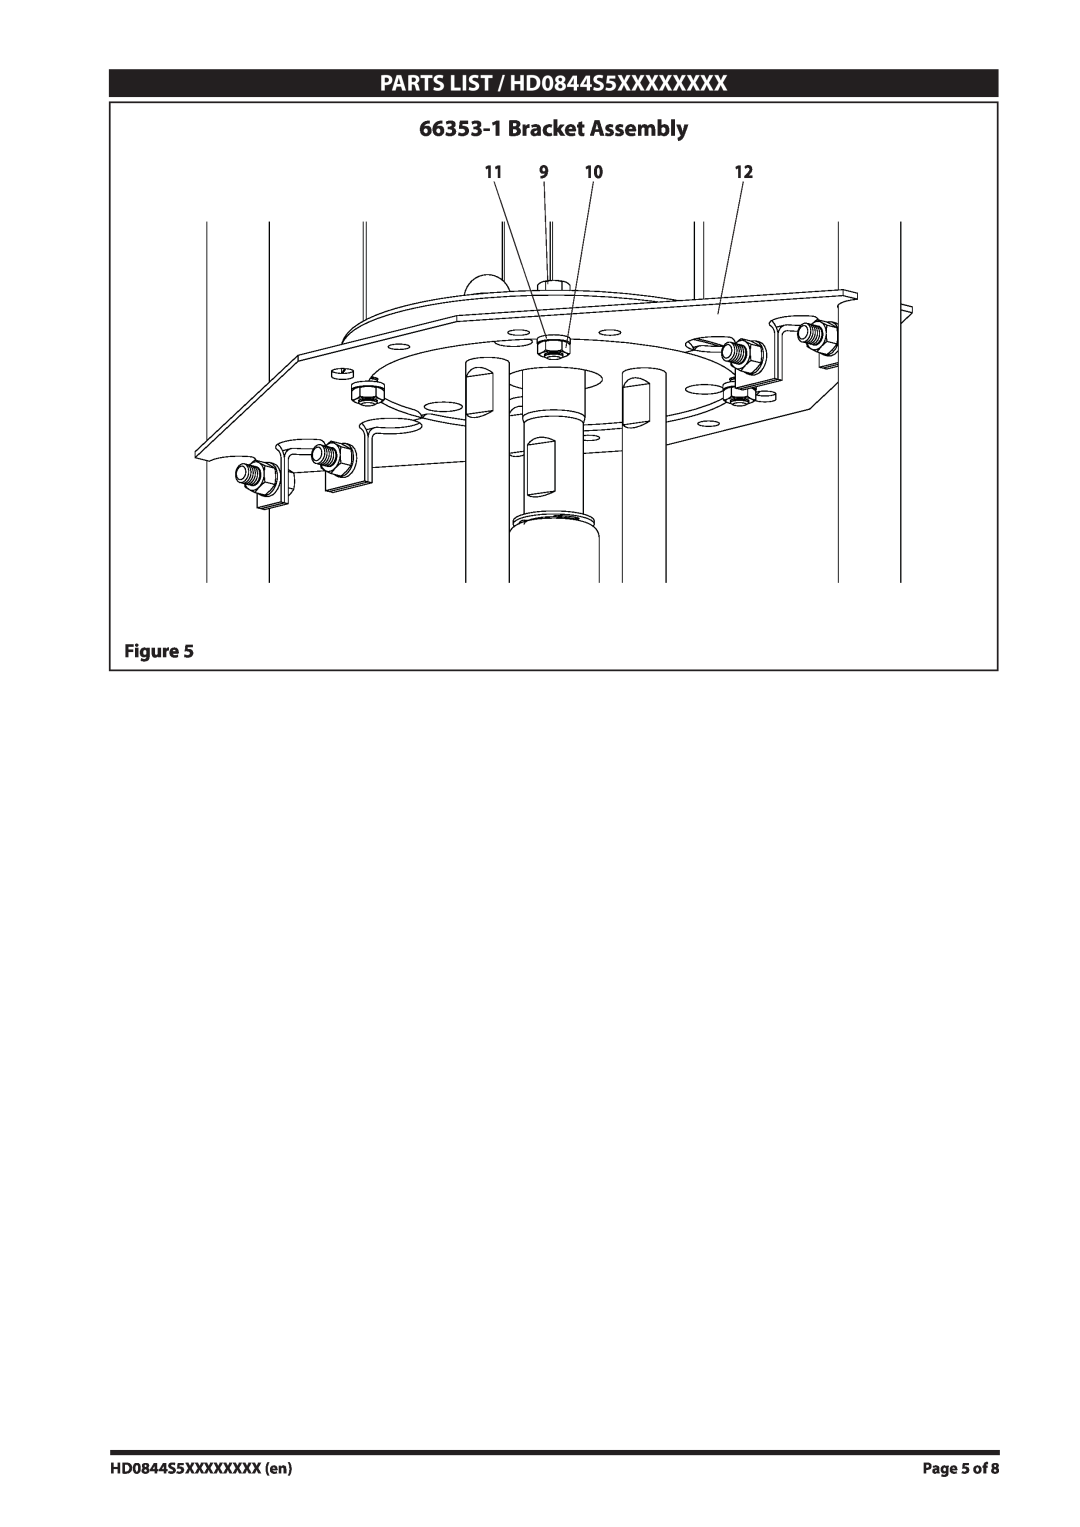 Ingersoll-Rand manual Bracket Assembly, PARTS LIST / HD0844S5XXXXXXXX, Page 5 of 